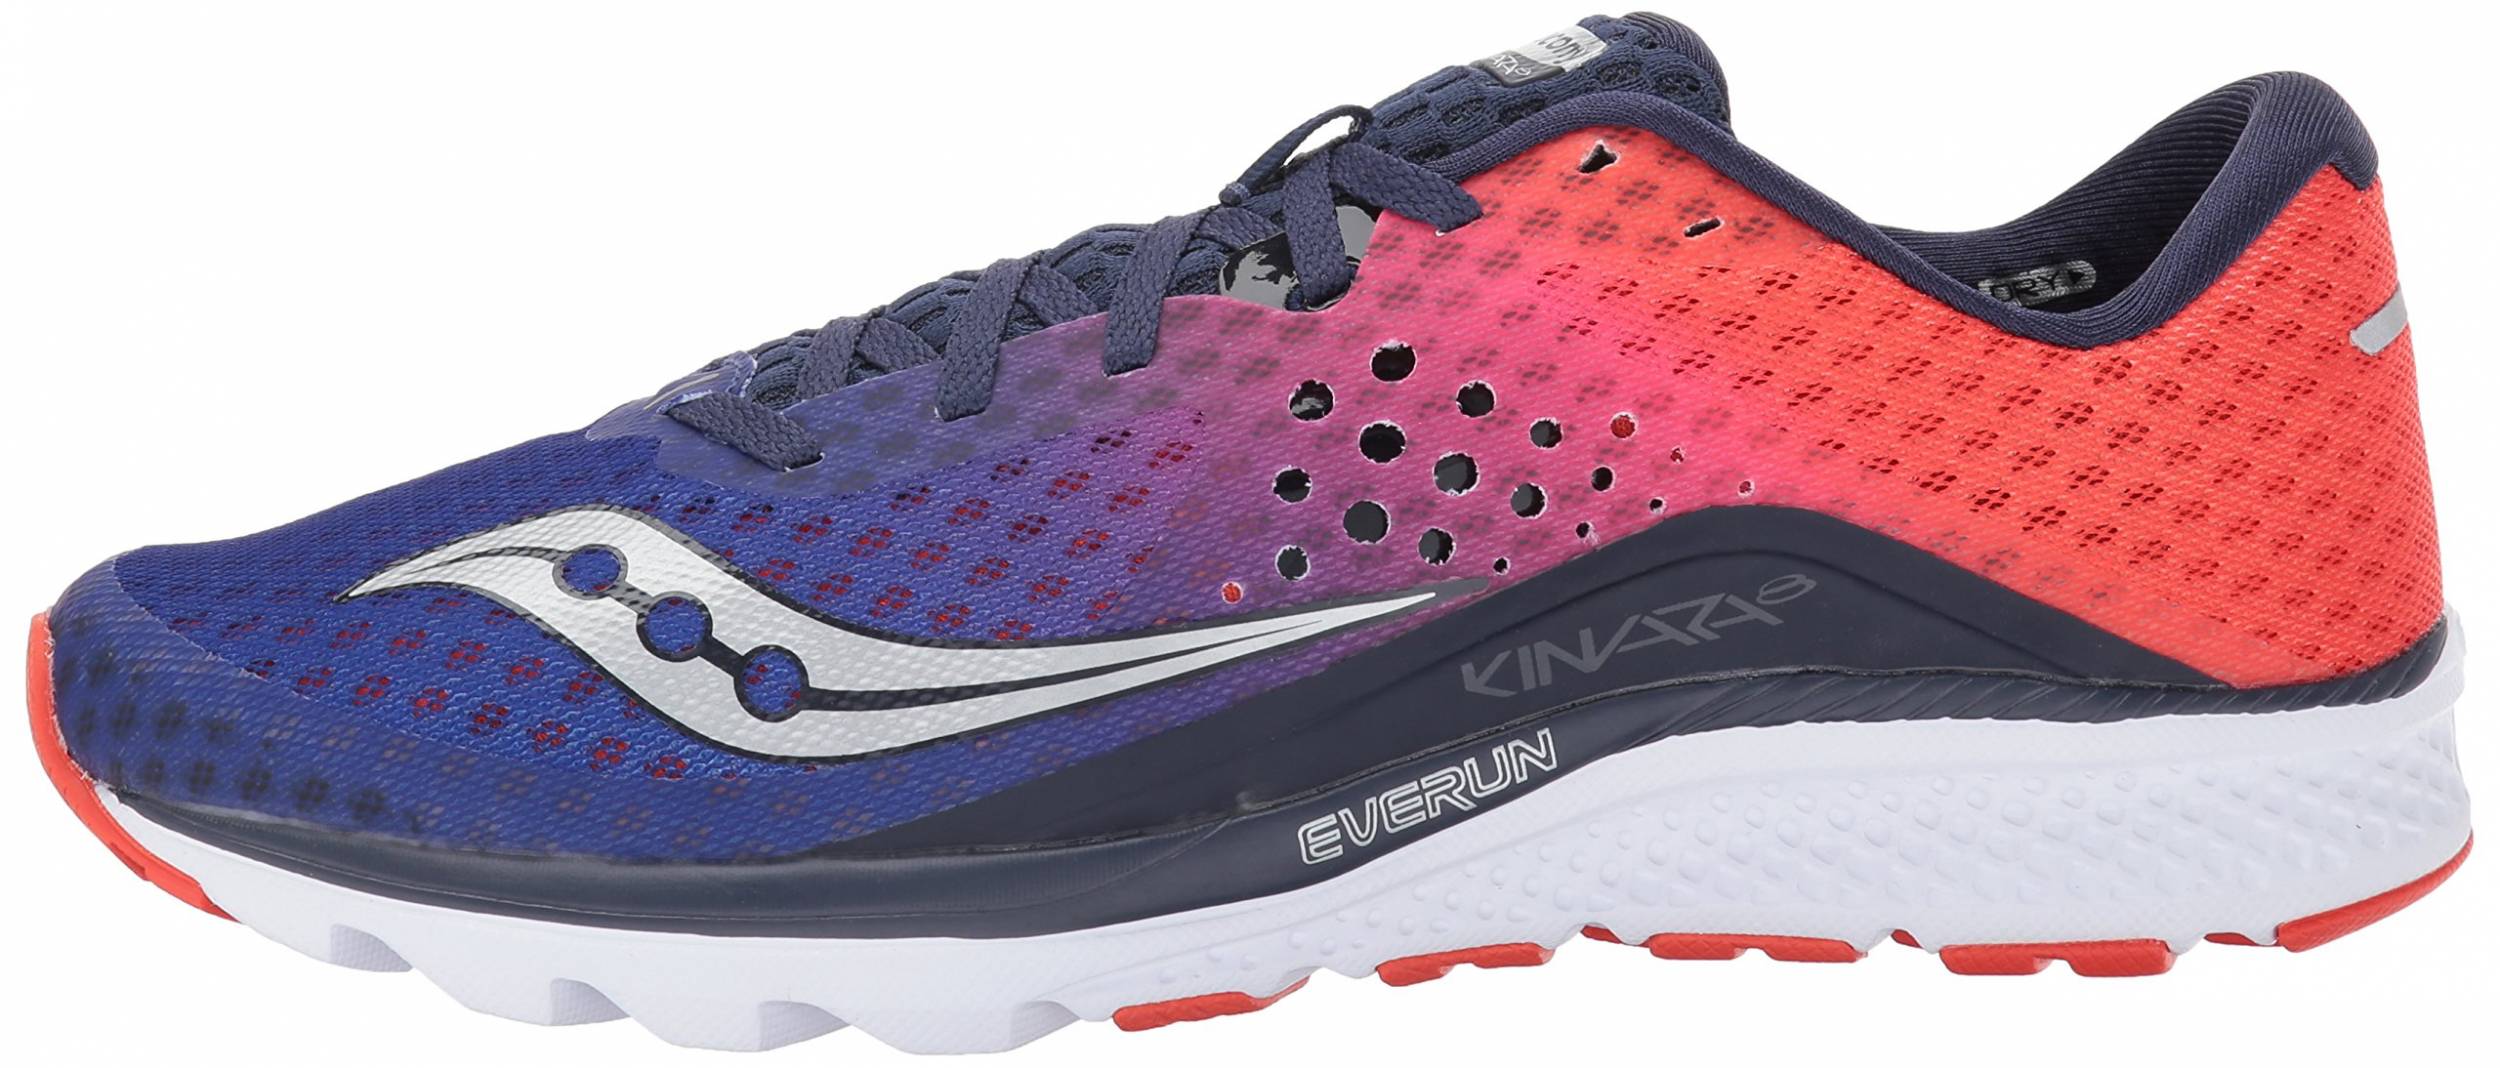 Only $43 + Review of Saucony Kinvara 8 | RunRepeat